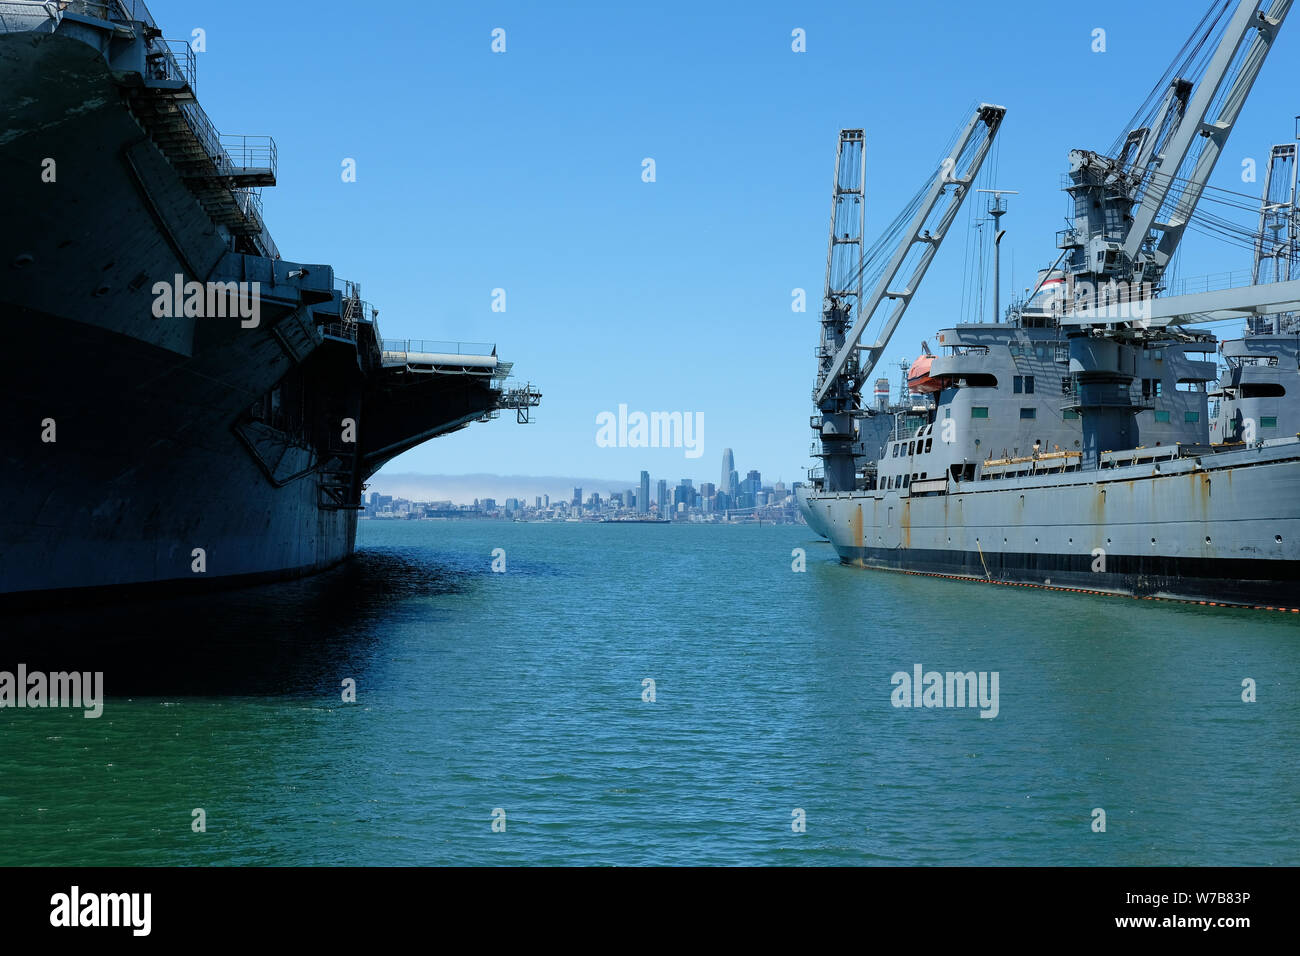 The downtown San Francisco skyline from across the San Francisco Bay in Alameda, California seen between the USS Hornet and SS Grand Canyon State. Stock Photo